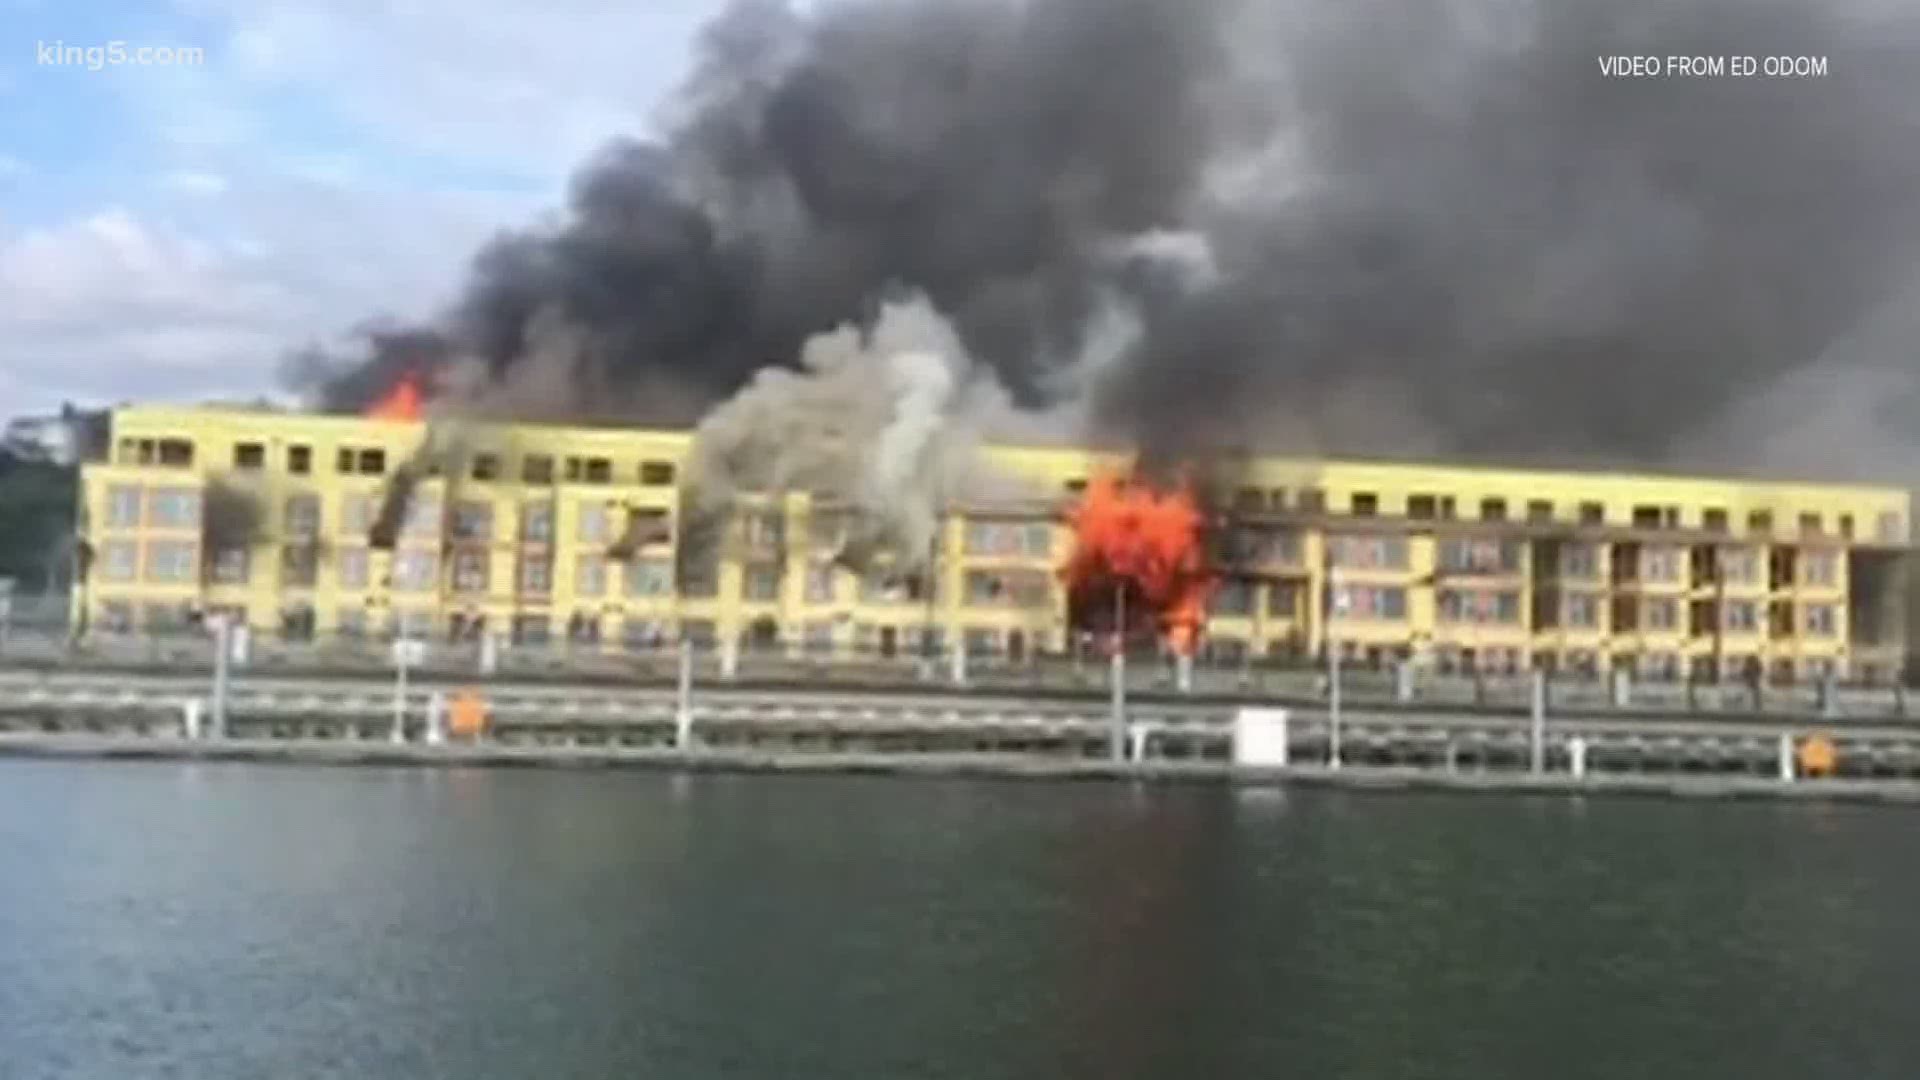 Flames engulfed an apartment building under construction near the Everett Marina on West Marine View Drive. A home and emergency vehicles were also damaged.